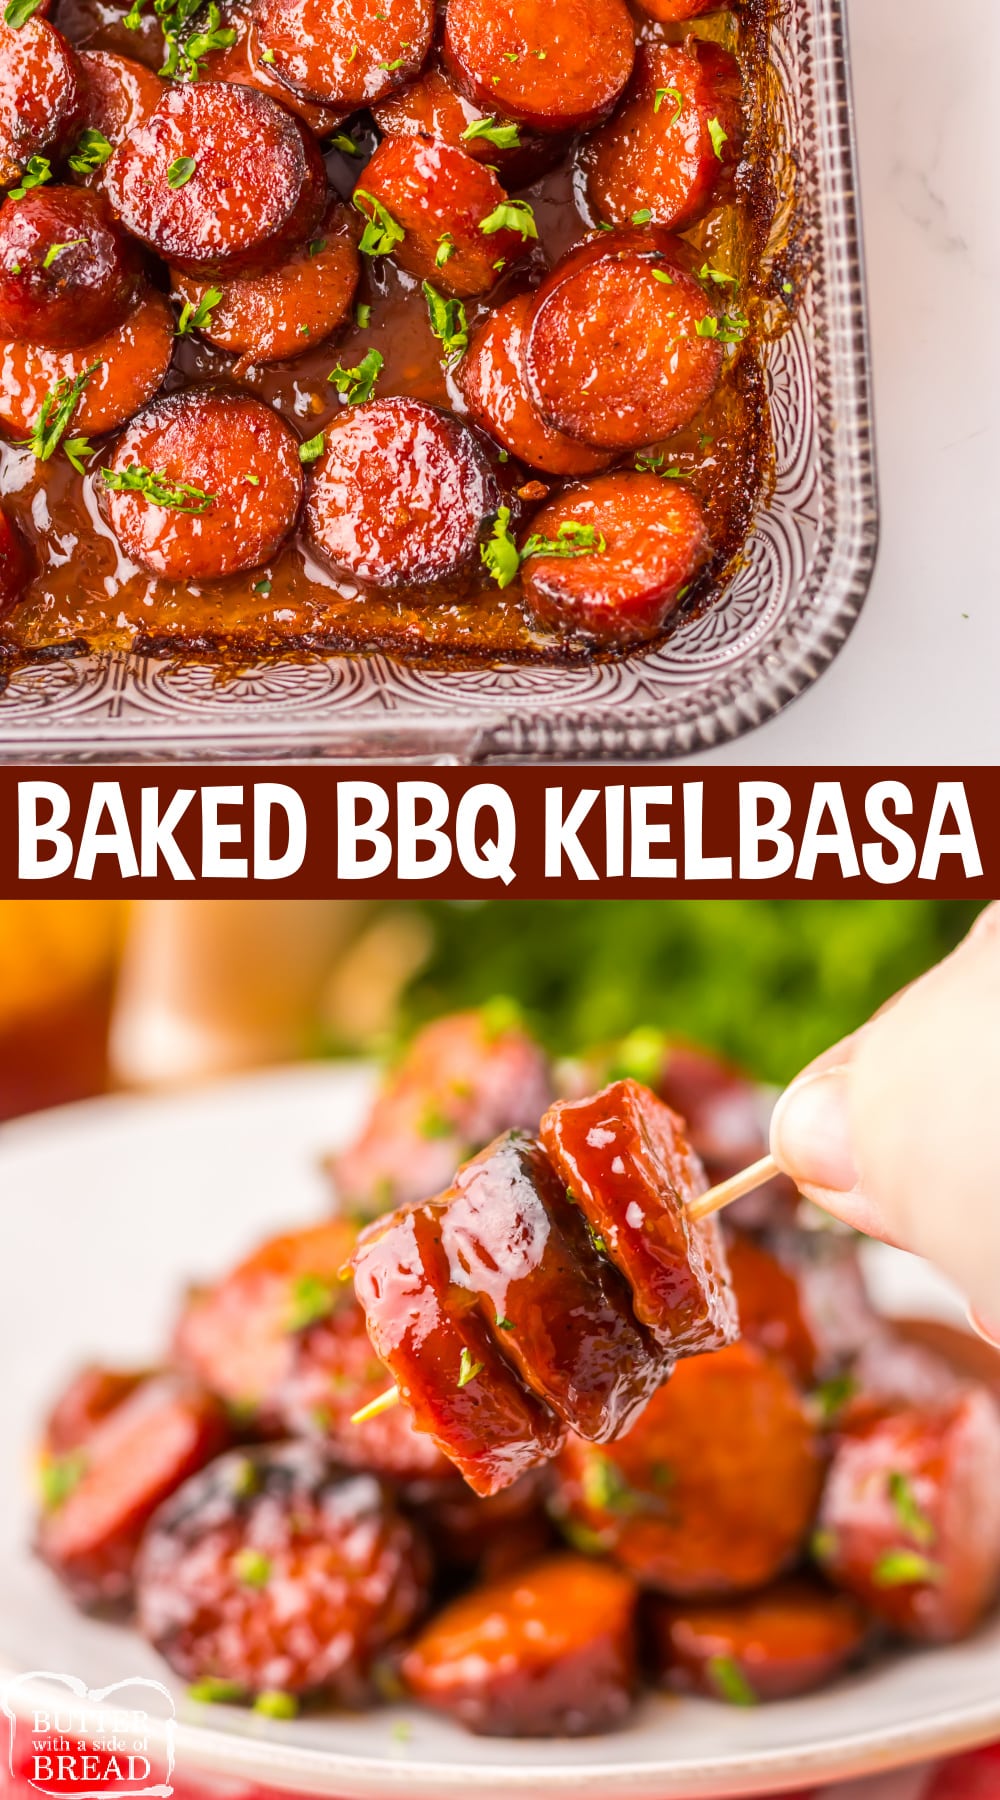 This Baked BBQ Kielbasa is an easy crowd-pleaser.  Smoked sausage, BBQ sauce, brown sugar, seasonings, and mustard come together to create a delicious appetizer or main dish to serve at your next potluck. 